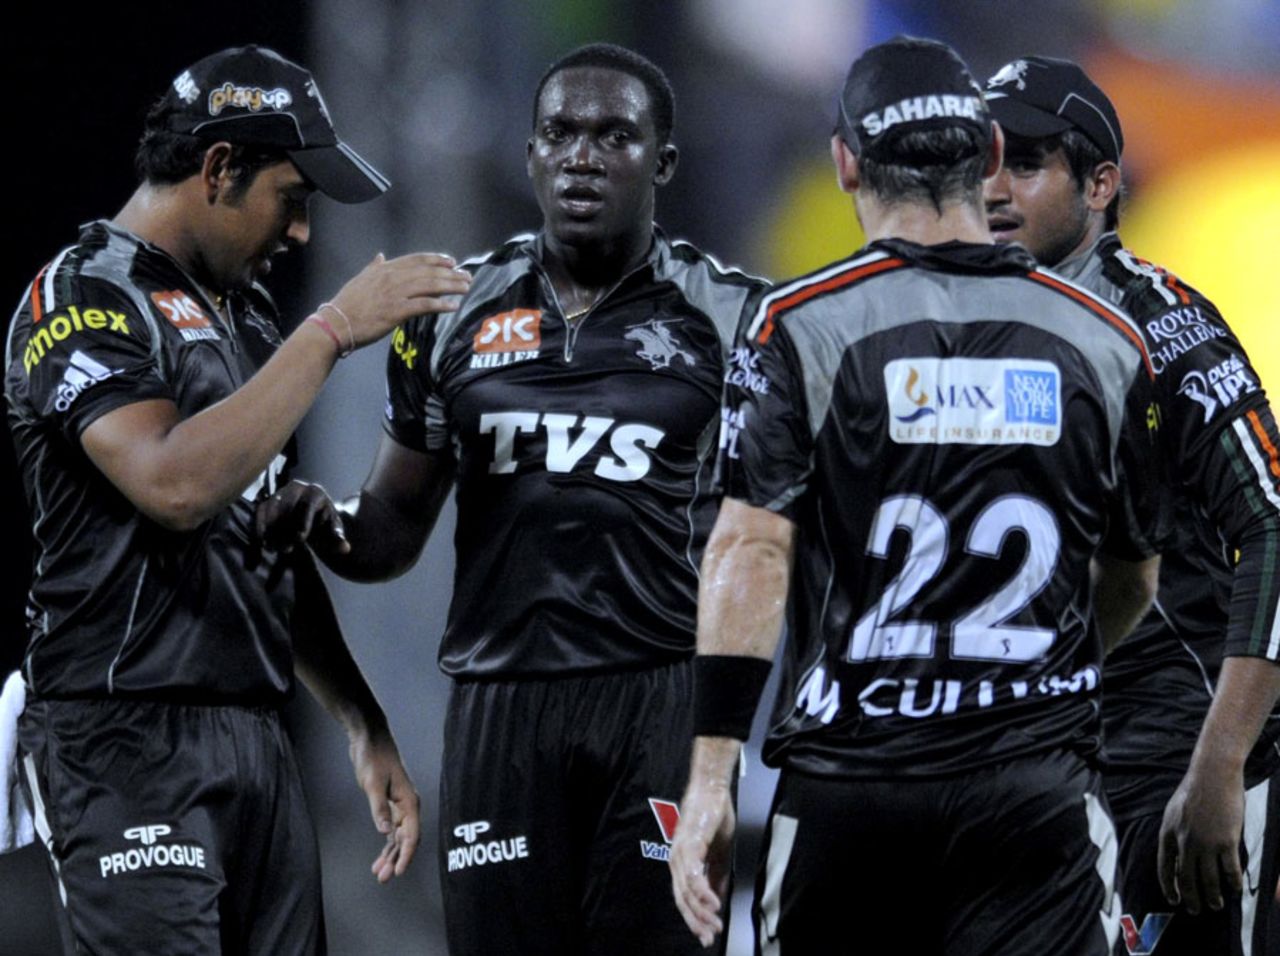 Jerome Taylor is congratulated after getting Michael Hussey, Chennai Super Kings v Pune Warriors, IPL 2011, Chennai